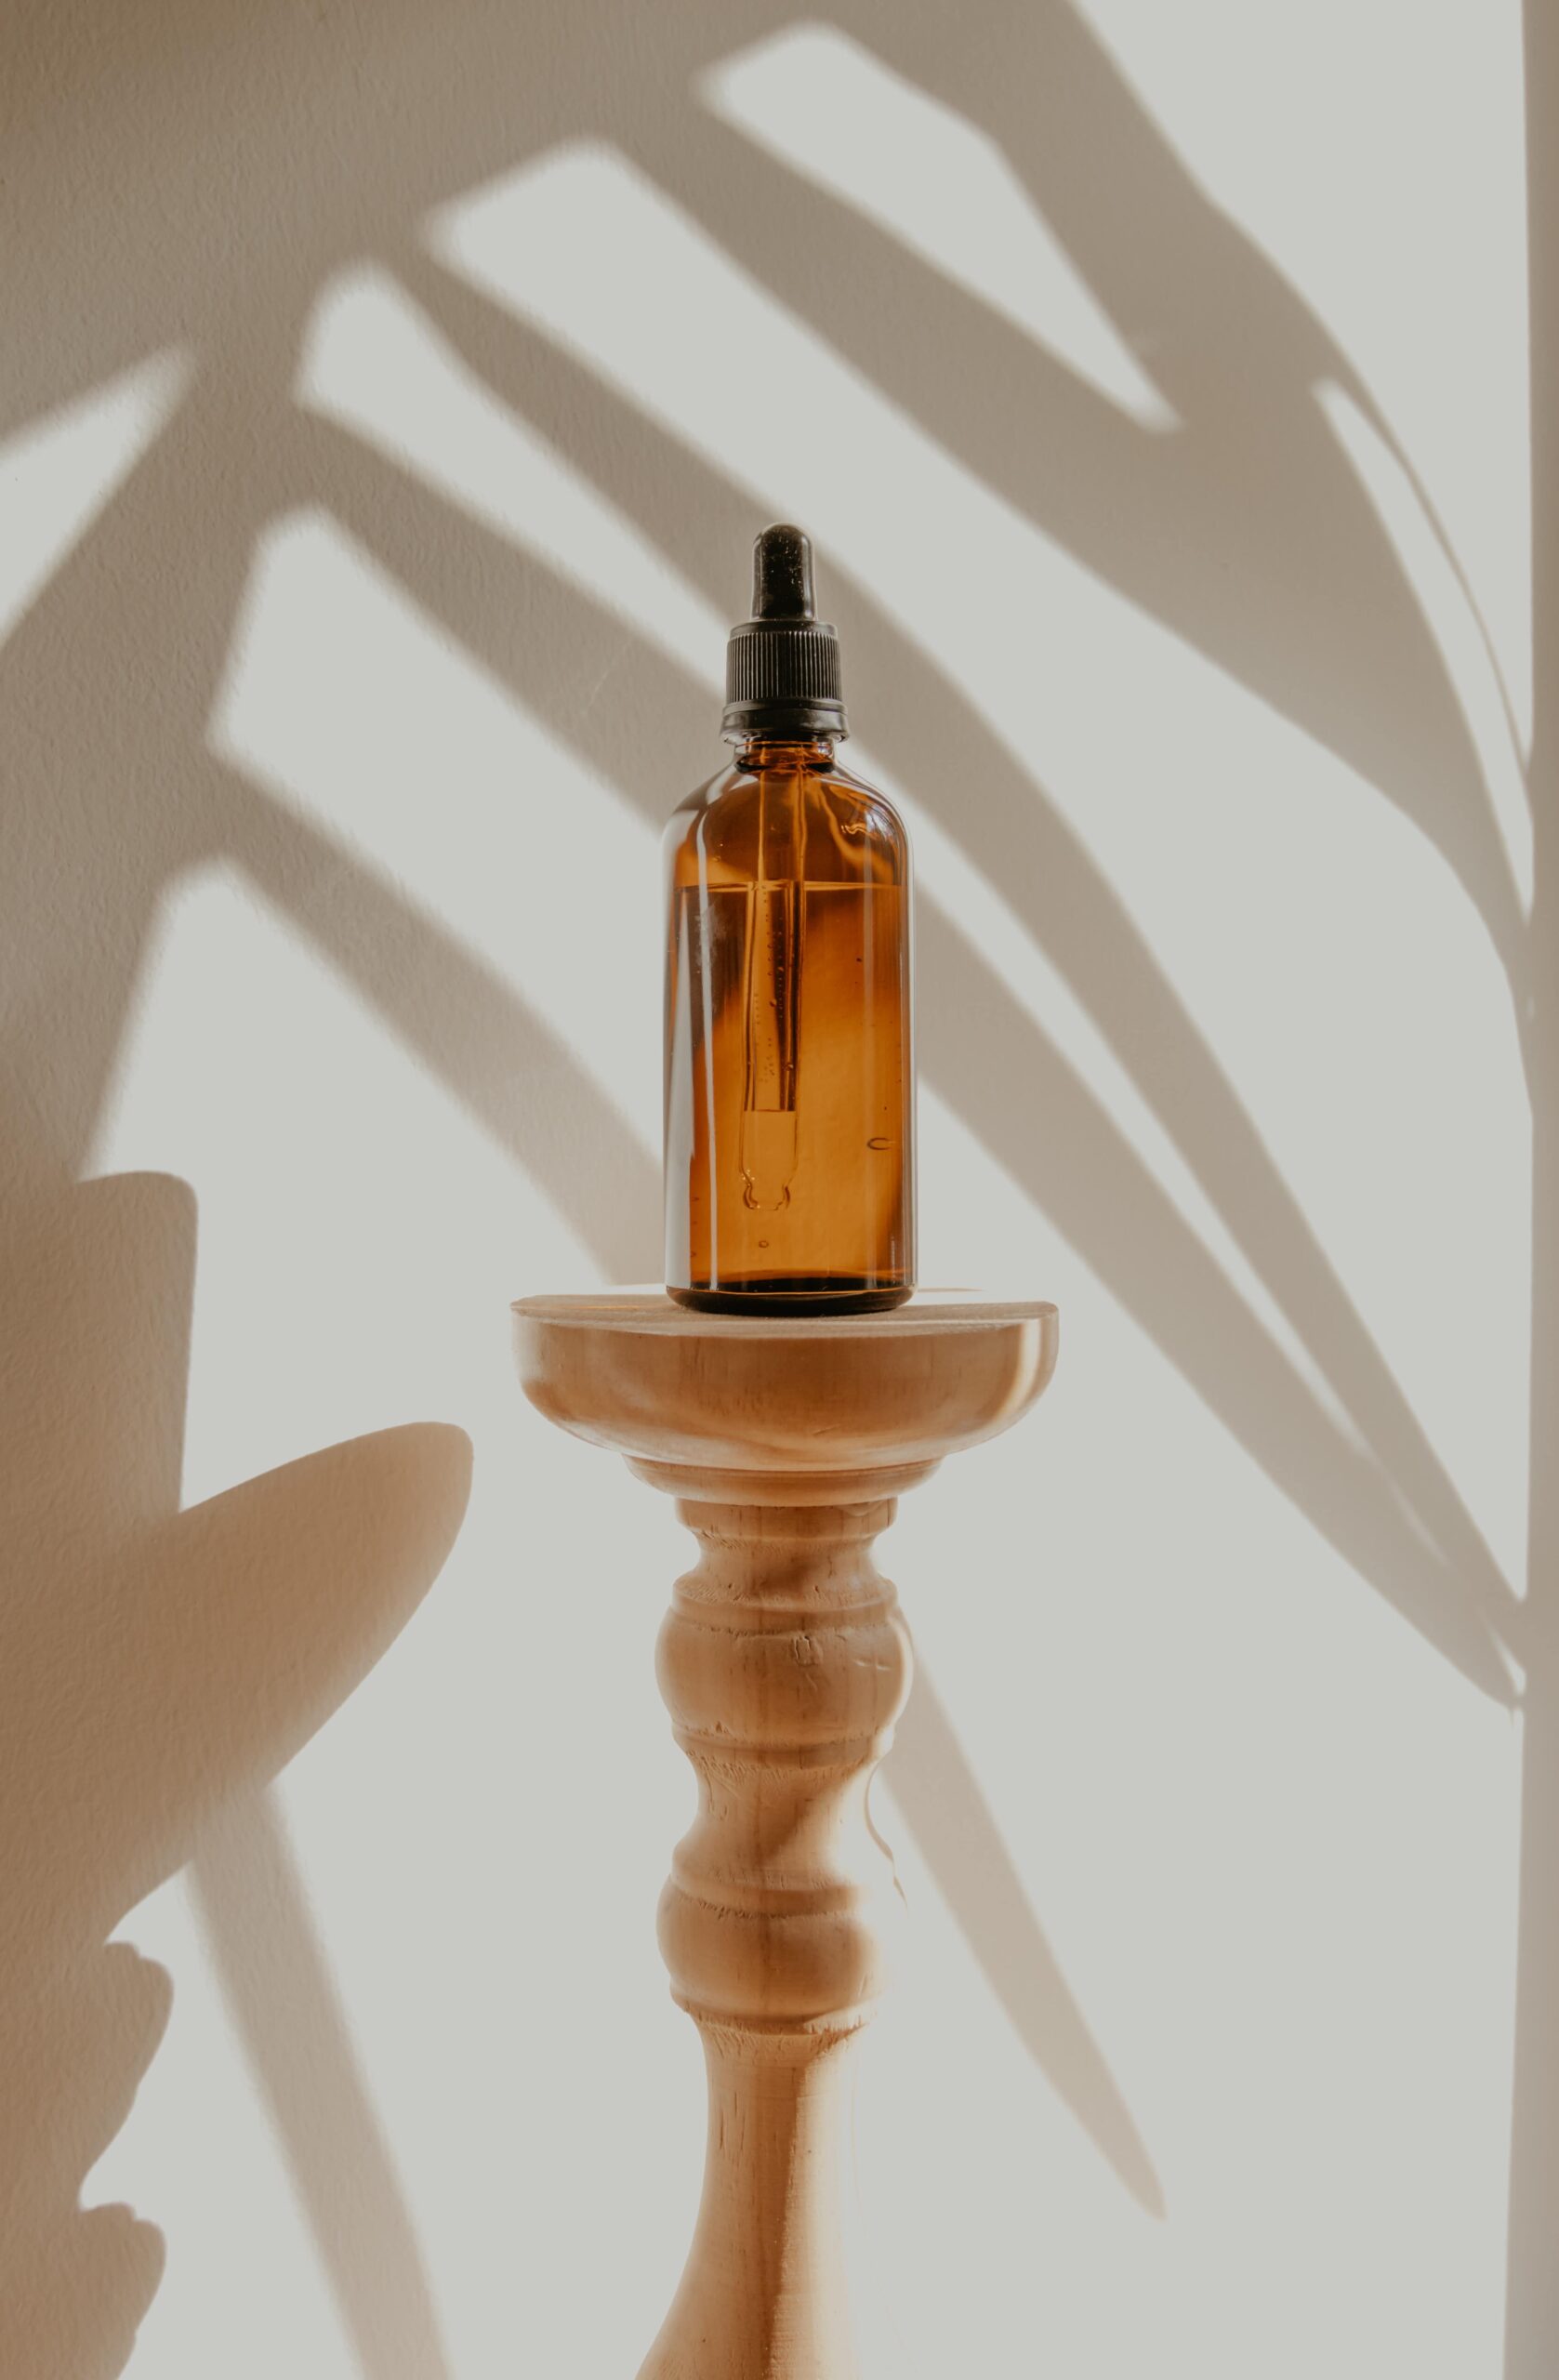 A Quick Guide to Purchase CBD Oil Online Safely